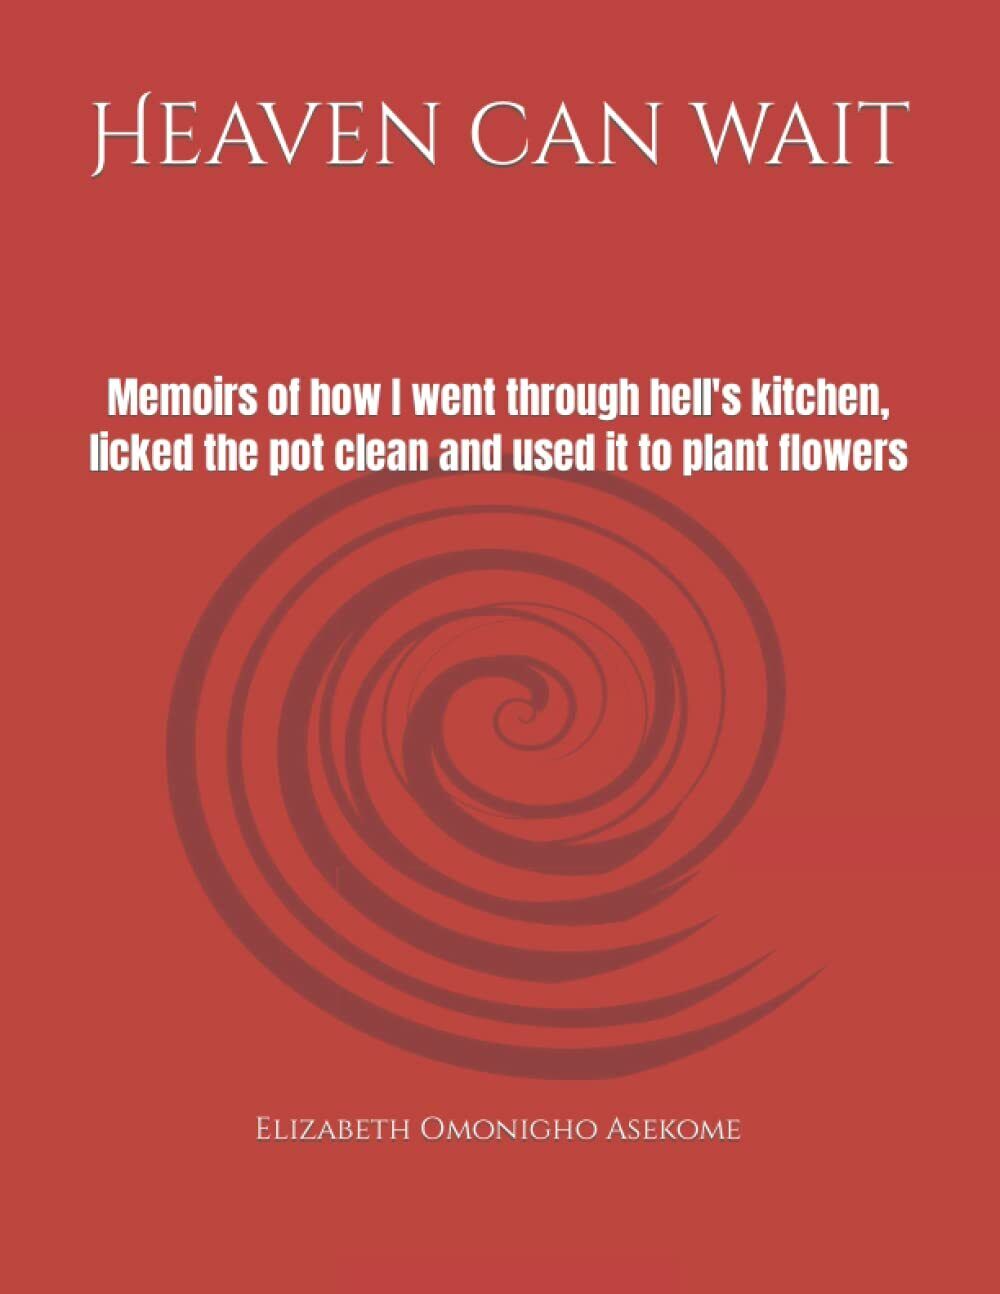 Heaven can wait: Memoirs of how I went through helL's kitchen, licked the pot cl